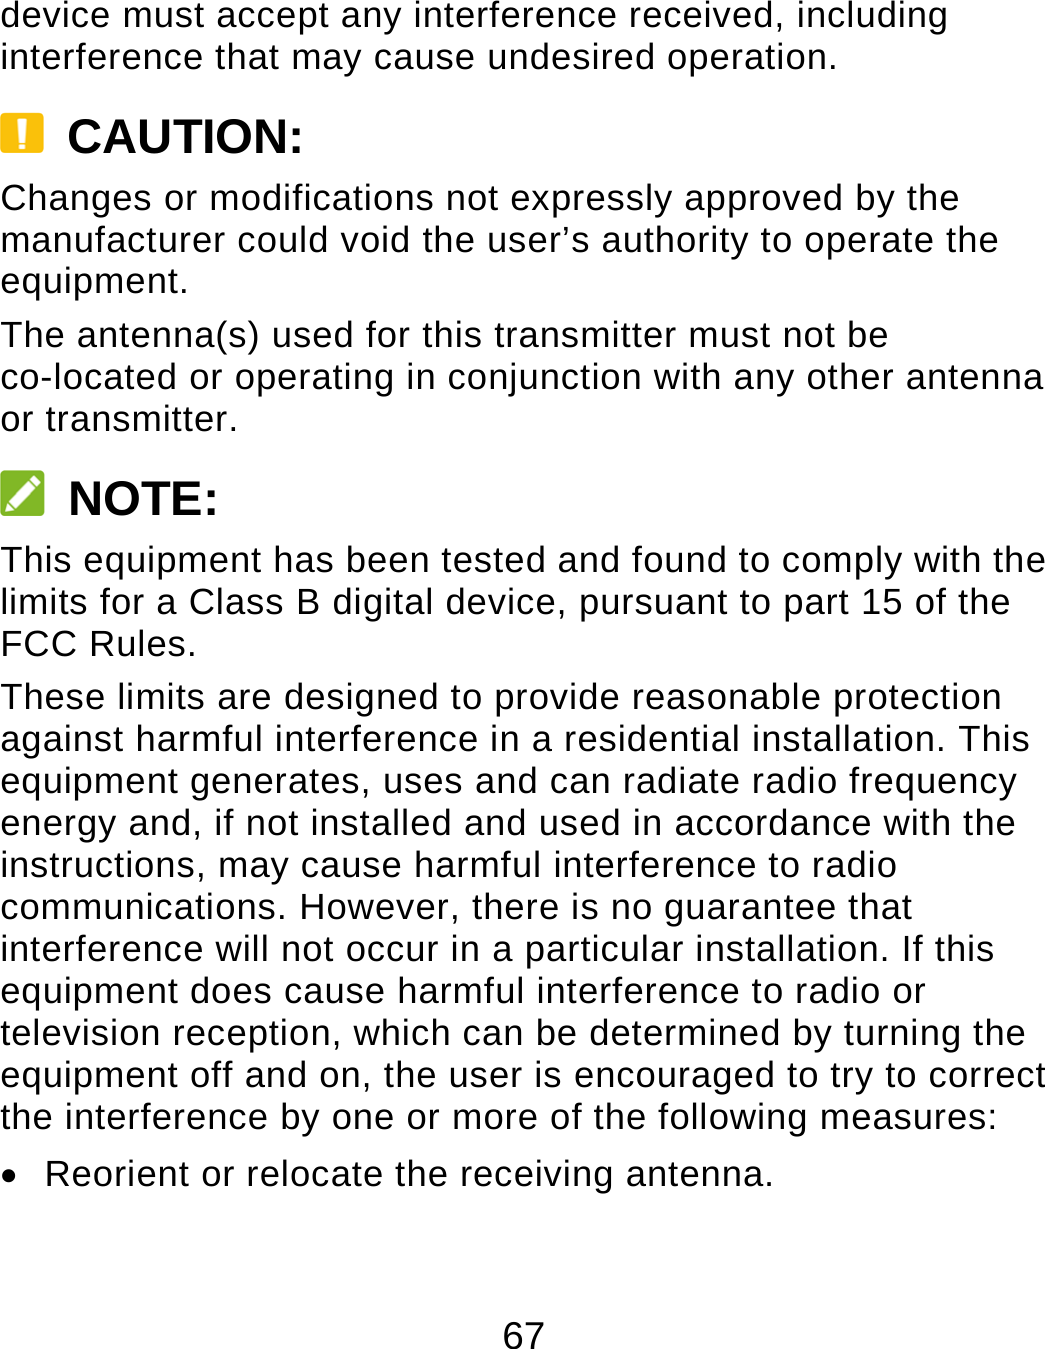 67 device must accept any interference received, including interference that may cause undesired operation.  CAUTION: Changes or modifications not expressly approved by the manufacturer could void the user’s authority to operate the equipment. The antenna(s) used for this transmitter must not be co-located or operating in conjunction with any other antenna or transmitter.  NOTE: This equipment has been tested and found to comply with the limits for a Class B digital device, pursuant to part 15 of the FCC Rules.   These limits are designed to provide reasonable protection against harmful interference in a residential installation. This equipment generates, uses and can radiate radio frequency energy and, if not installed and used in accordance with the instructions, may cause harmful interference to radio communications. However, there is no guarantee that interference will not occur in a particular installation. If this equipment does cause harmful interference to radio or television reception, which can be determined by turning the equipment off and on, the user is encouraged to try to correct the interference by one or more of the following measures:   Reorient or relocate the receiving antenna. 